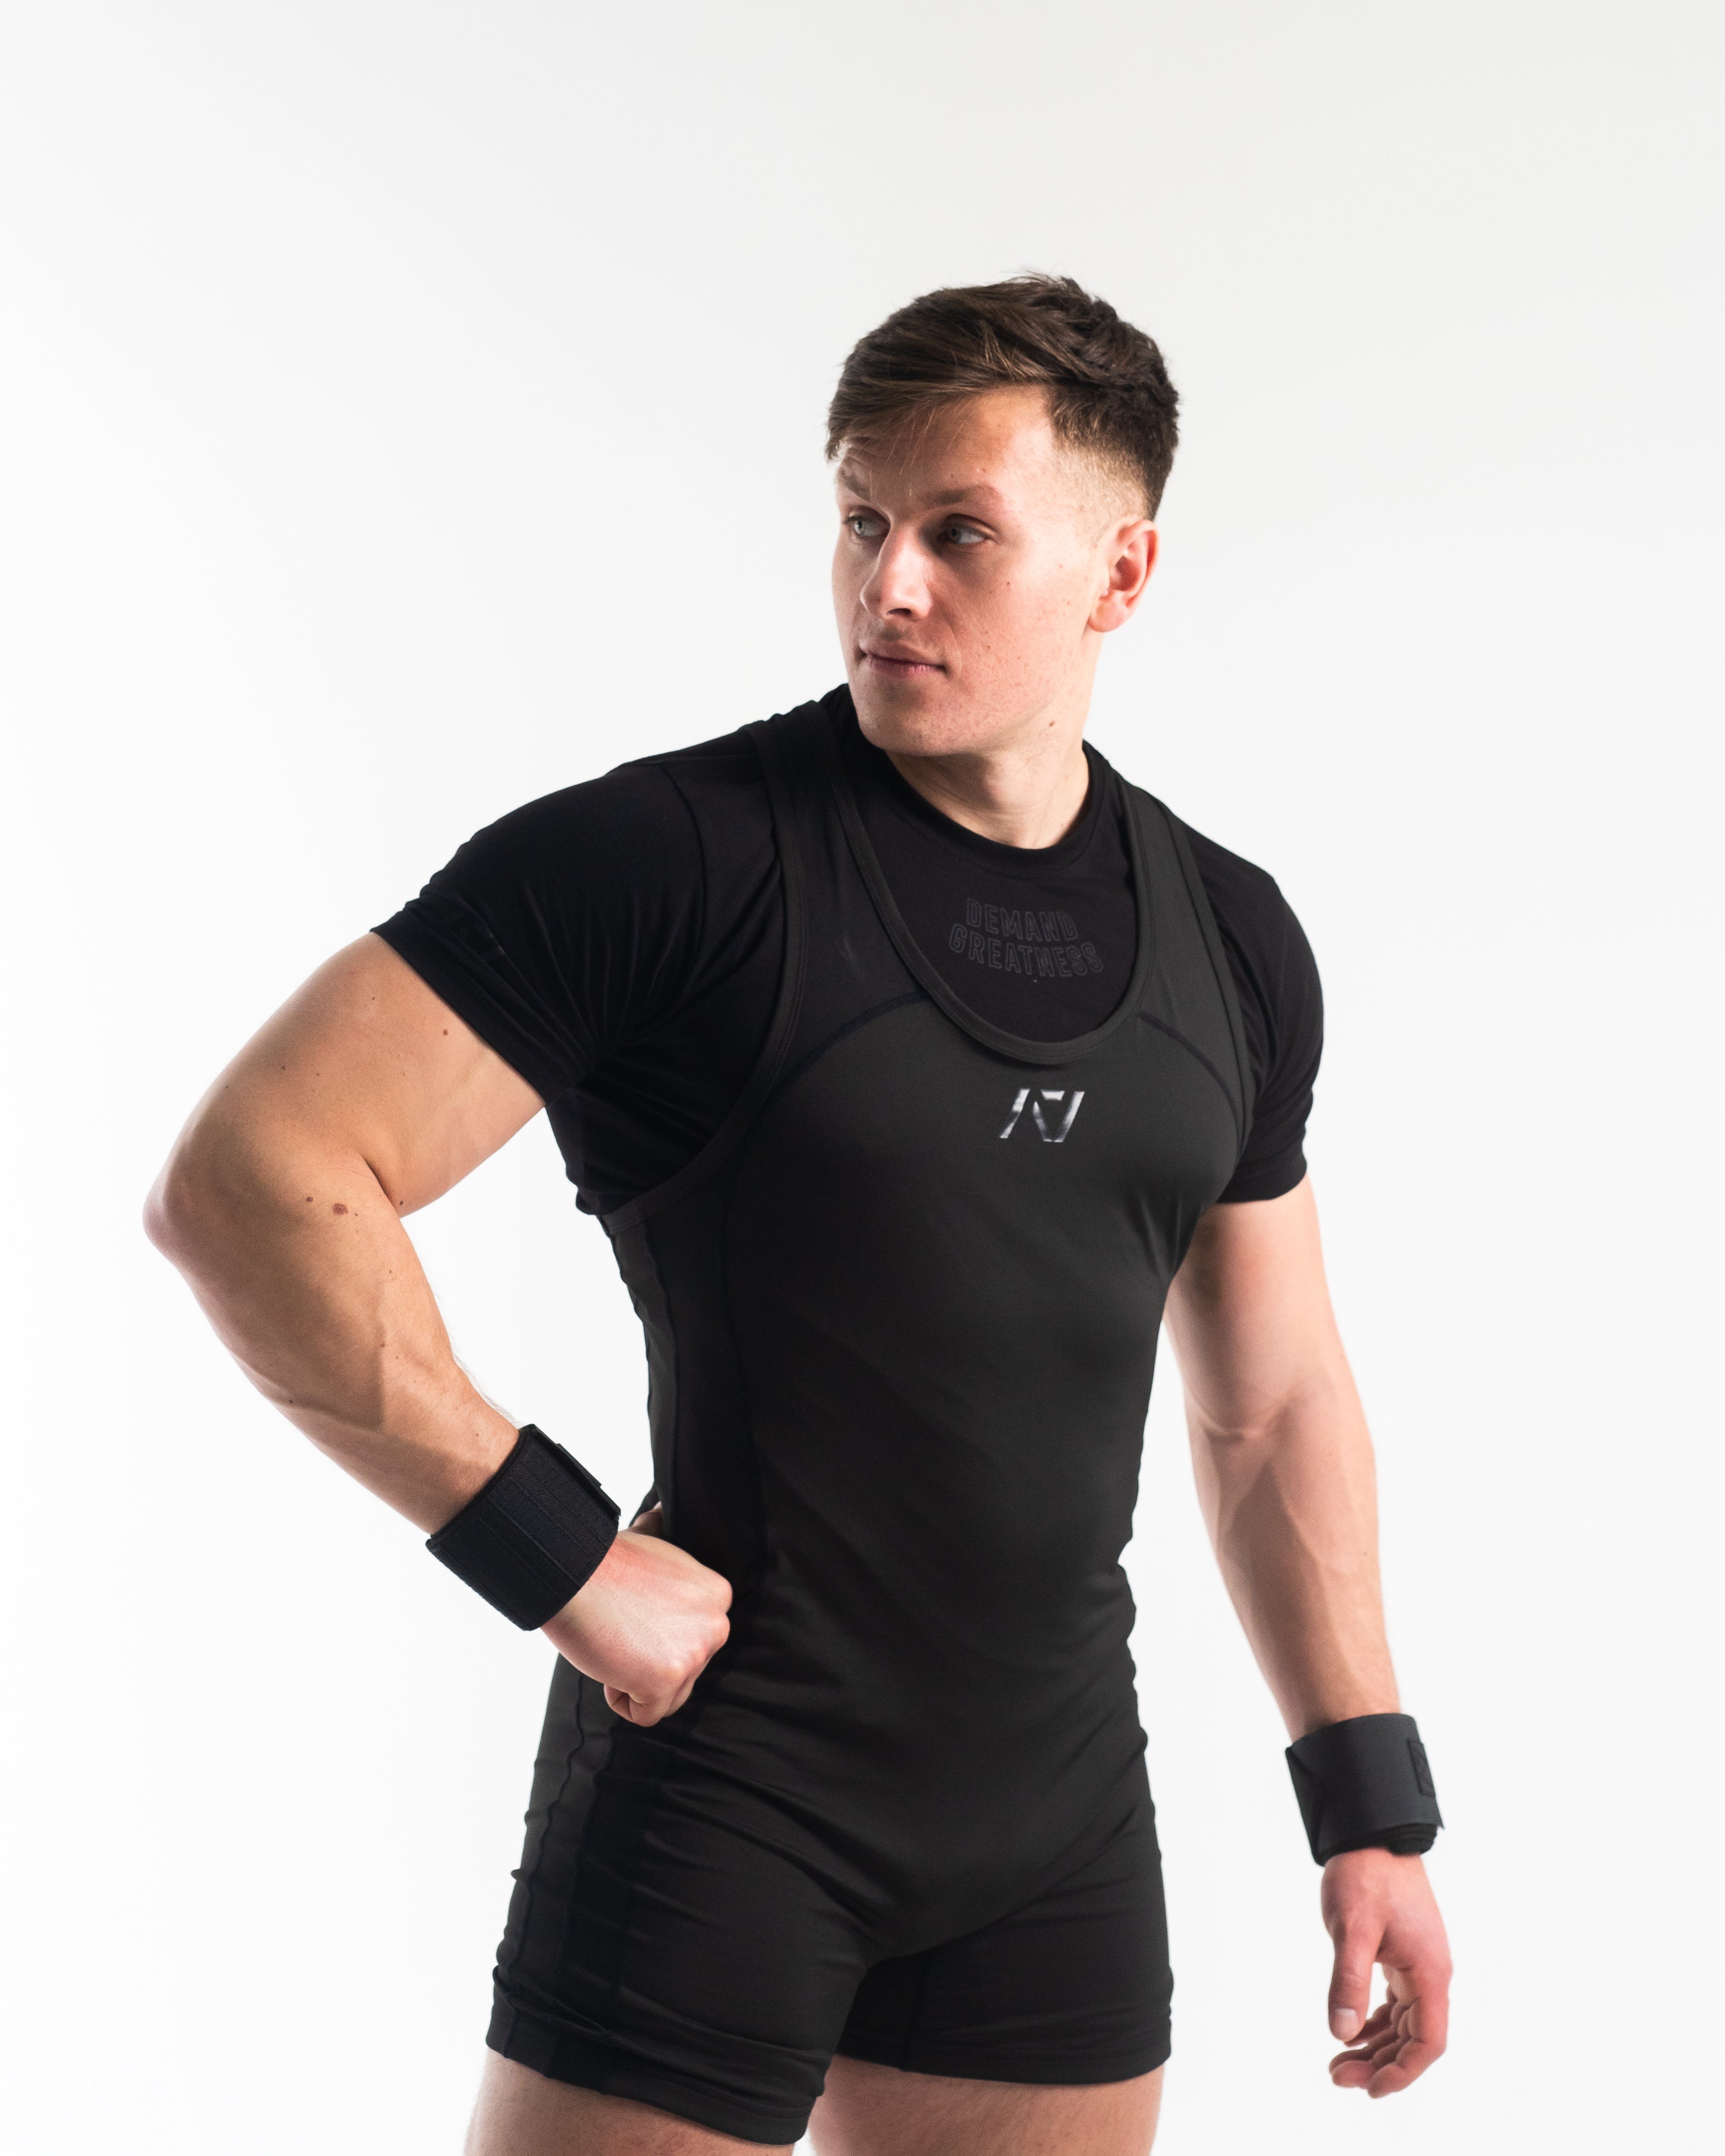 A7 IPF Approved Stealth Luno singlet features extra lat mobility, side panel stitching to guide the squat depth level and curved panel design for a slimming look. The Women's cut singlet features a tapered waist and additional quad room. The IPF Approved Kit includes Powerlifting Singlet, A7 Meet Shirt, A7 Zebra Wrist Wraps, Deadlift Socks, Hourglass Knee Sleeves (Stiff Knee Sleeves and Rigor Mortis Knee Sleeves). Genouillères powerlifting shipping to France, Spain, Ireland, Germany, Italy, Sweden and EU. 